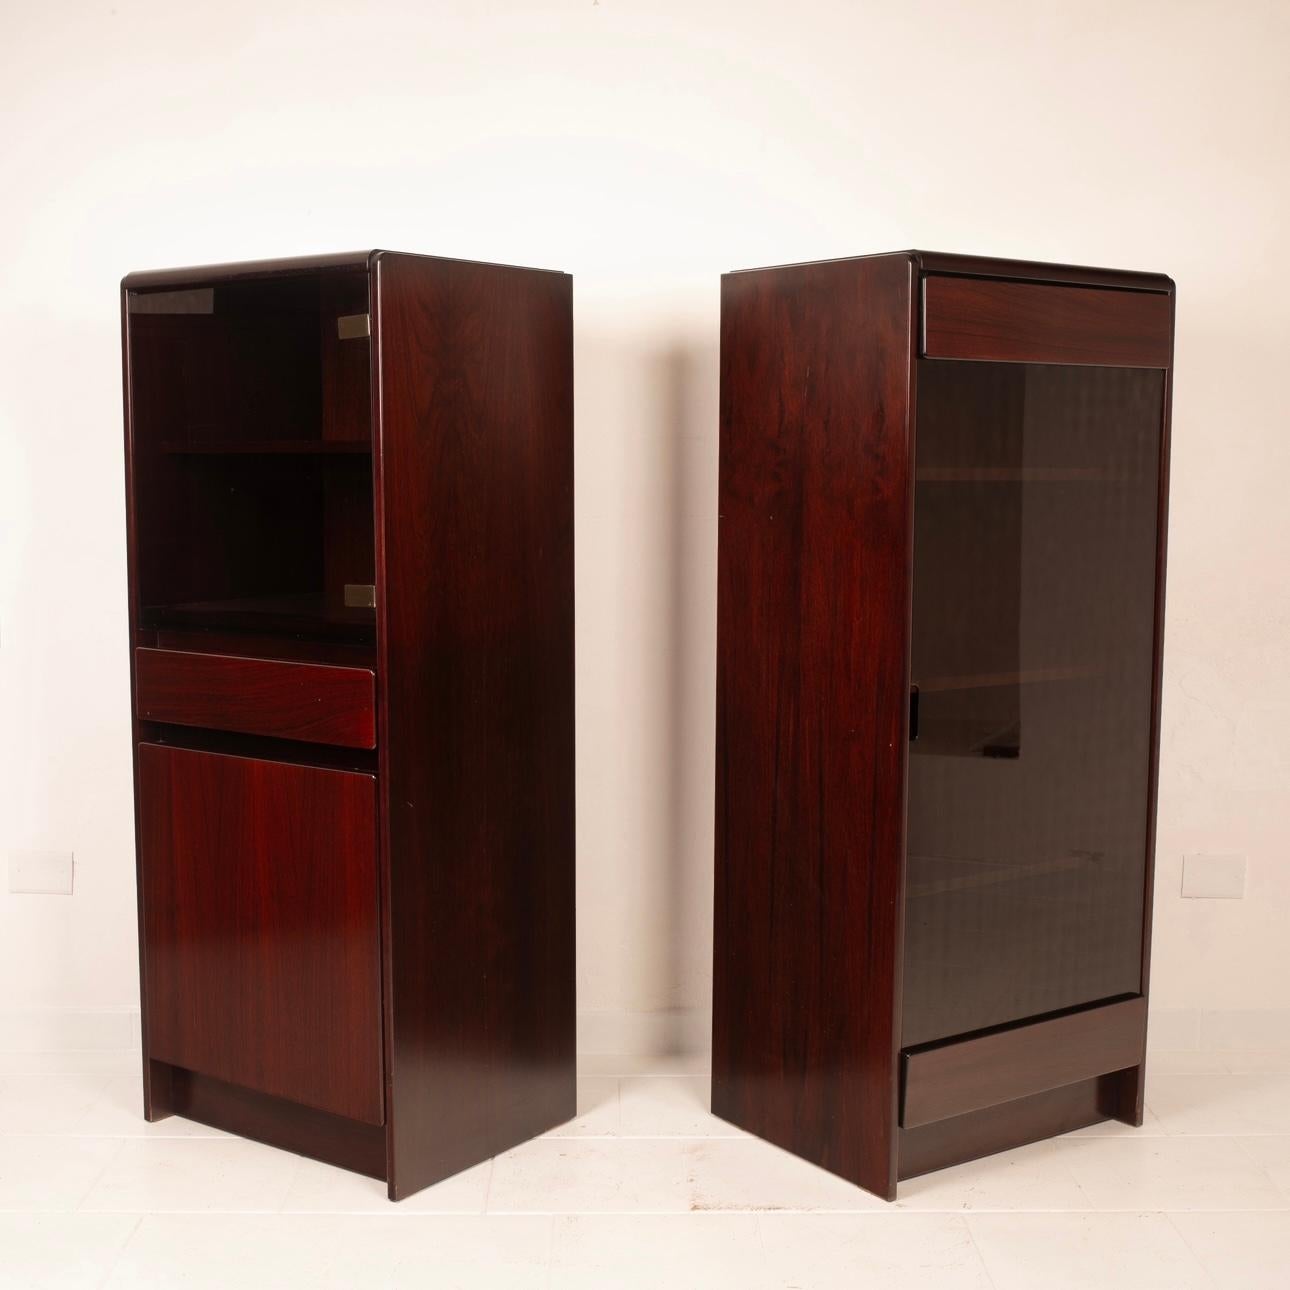 Explore an extraordinary pair of cabinets from the 